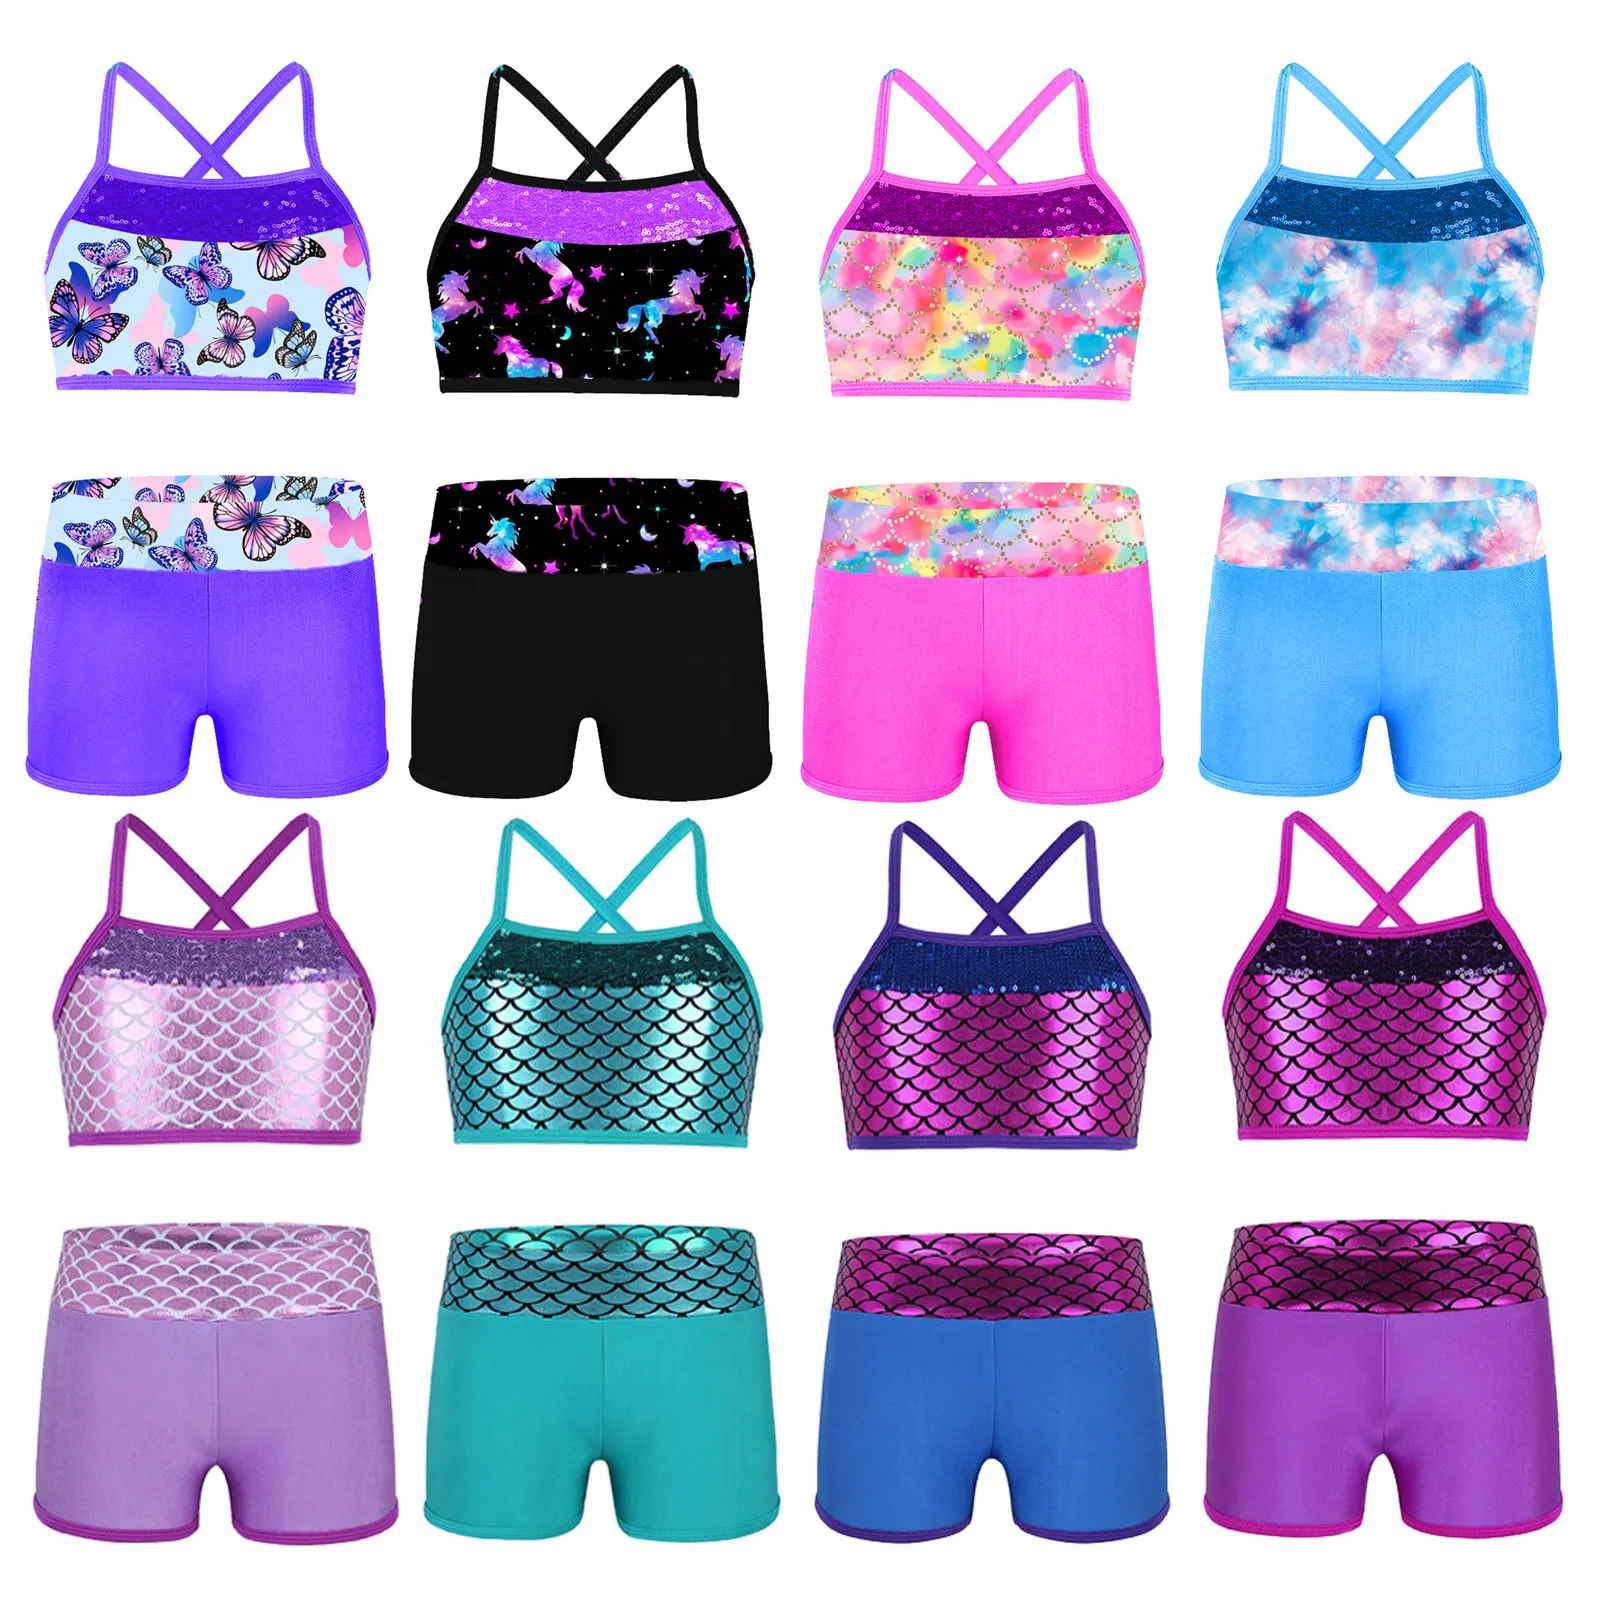 

Kids Girls Ballet Dancewear Set Workout Gymnastics Outfits Sleeveless Shiny Sequins Tank Top With Shorts Bottoms Tankini Outfit